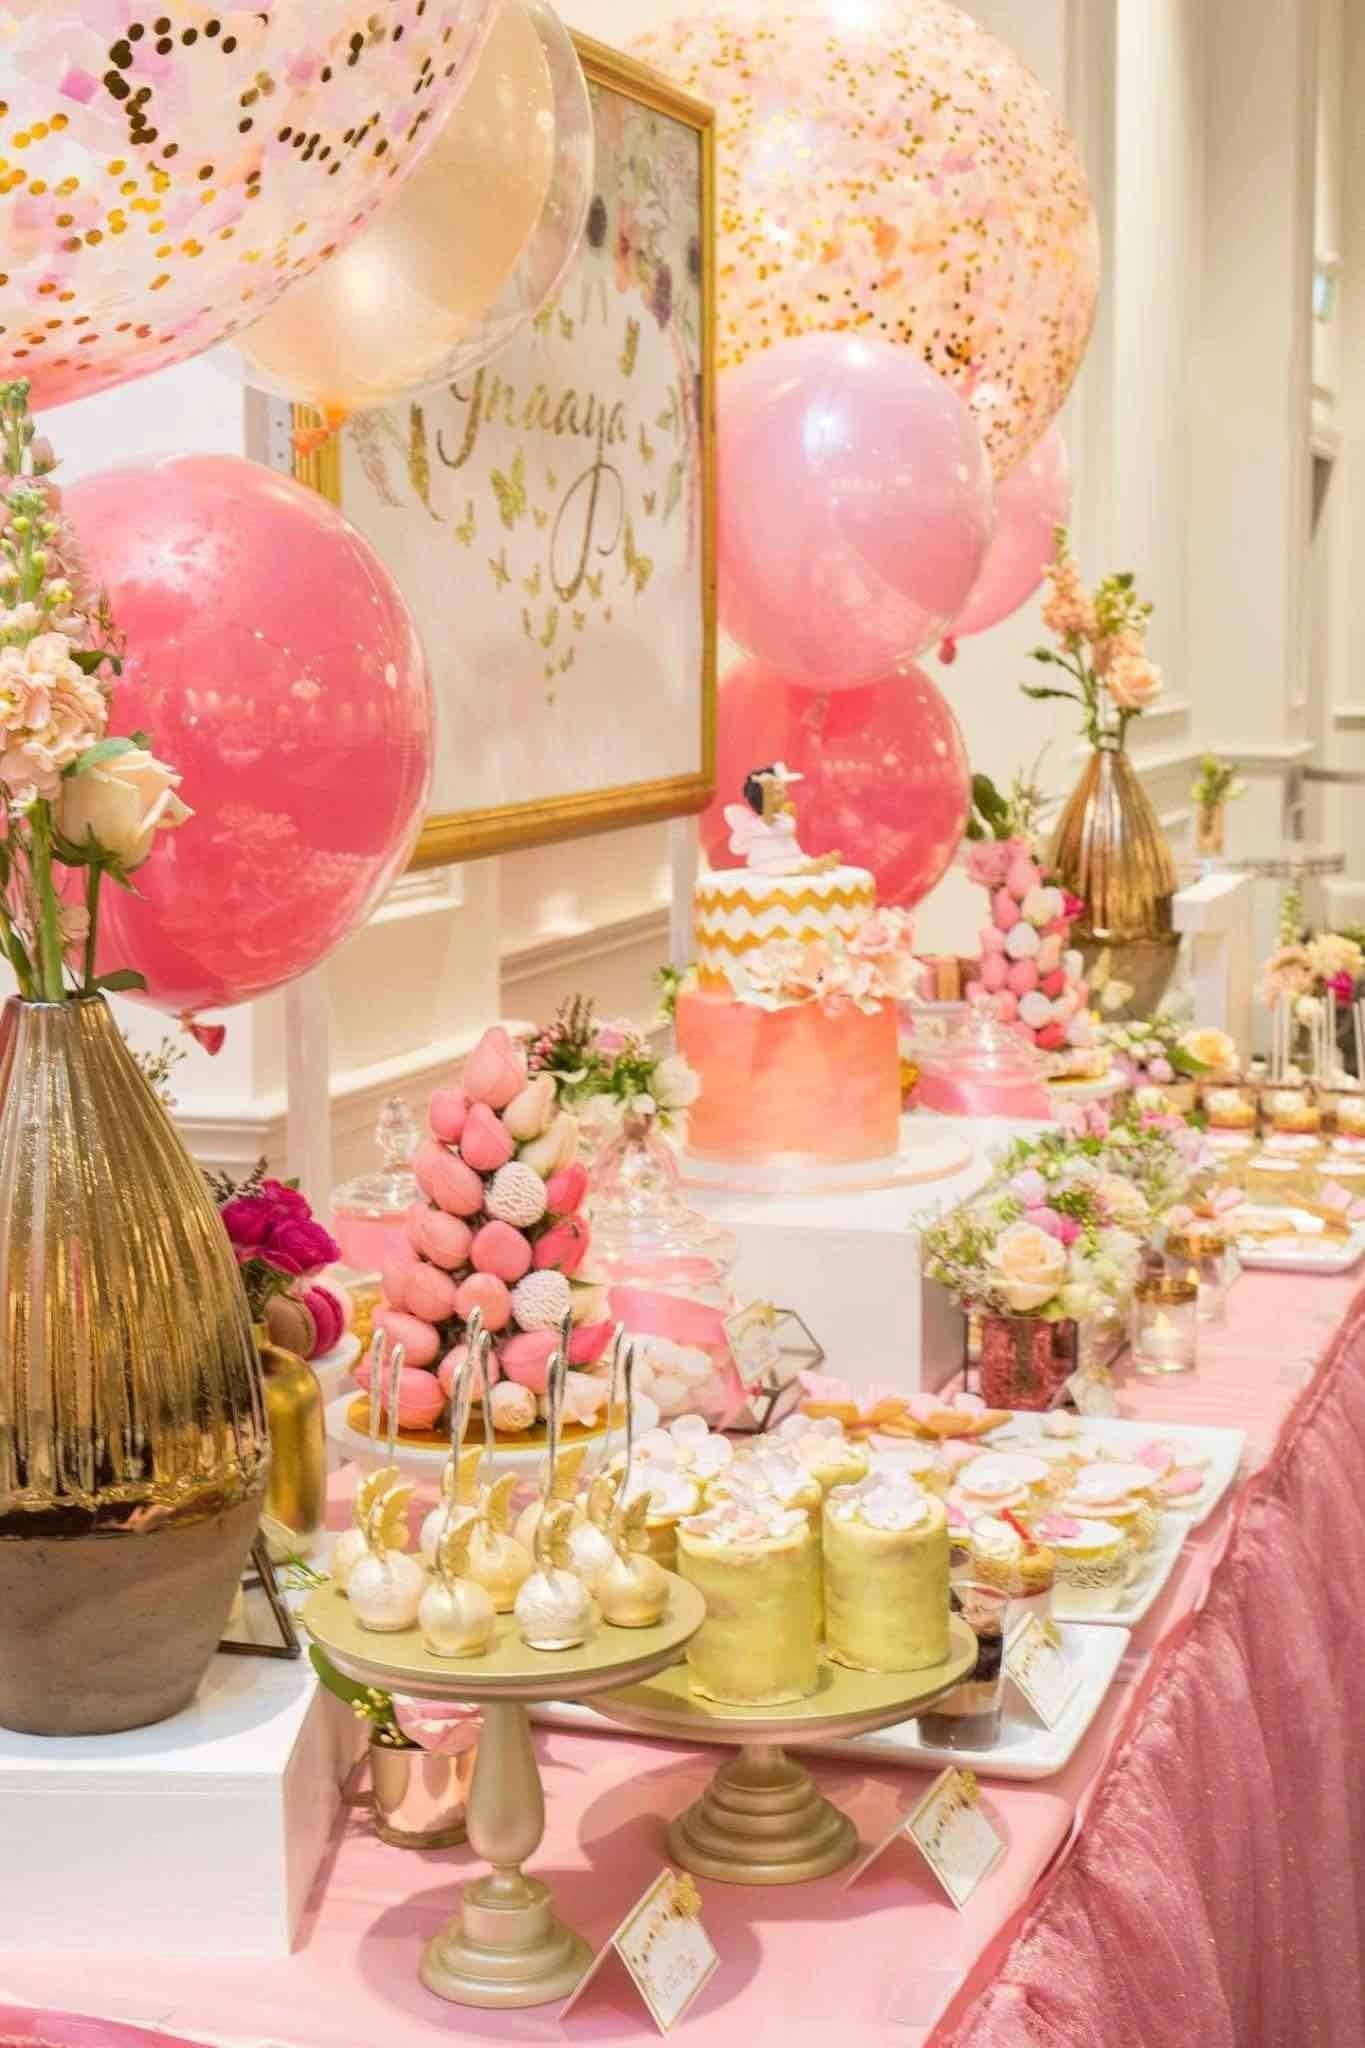 10 Attractive Bridal Shower Table Decoration Ideas bridal shower 101 everything you need to know melbourne bridal 2022